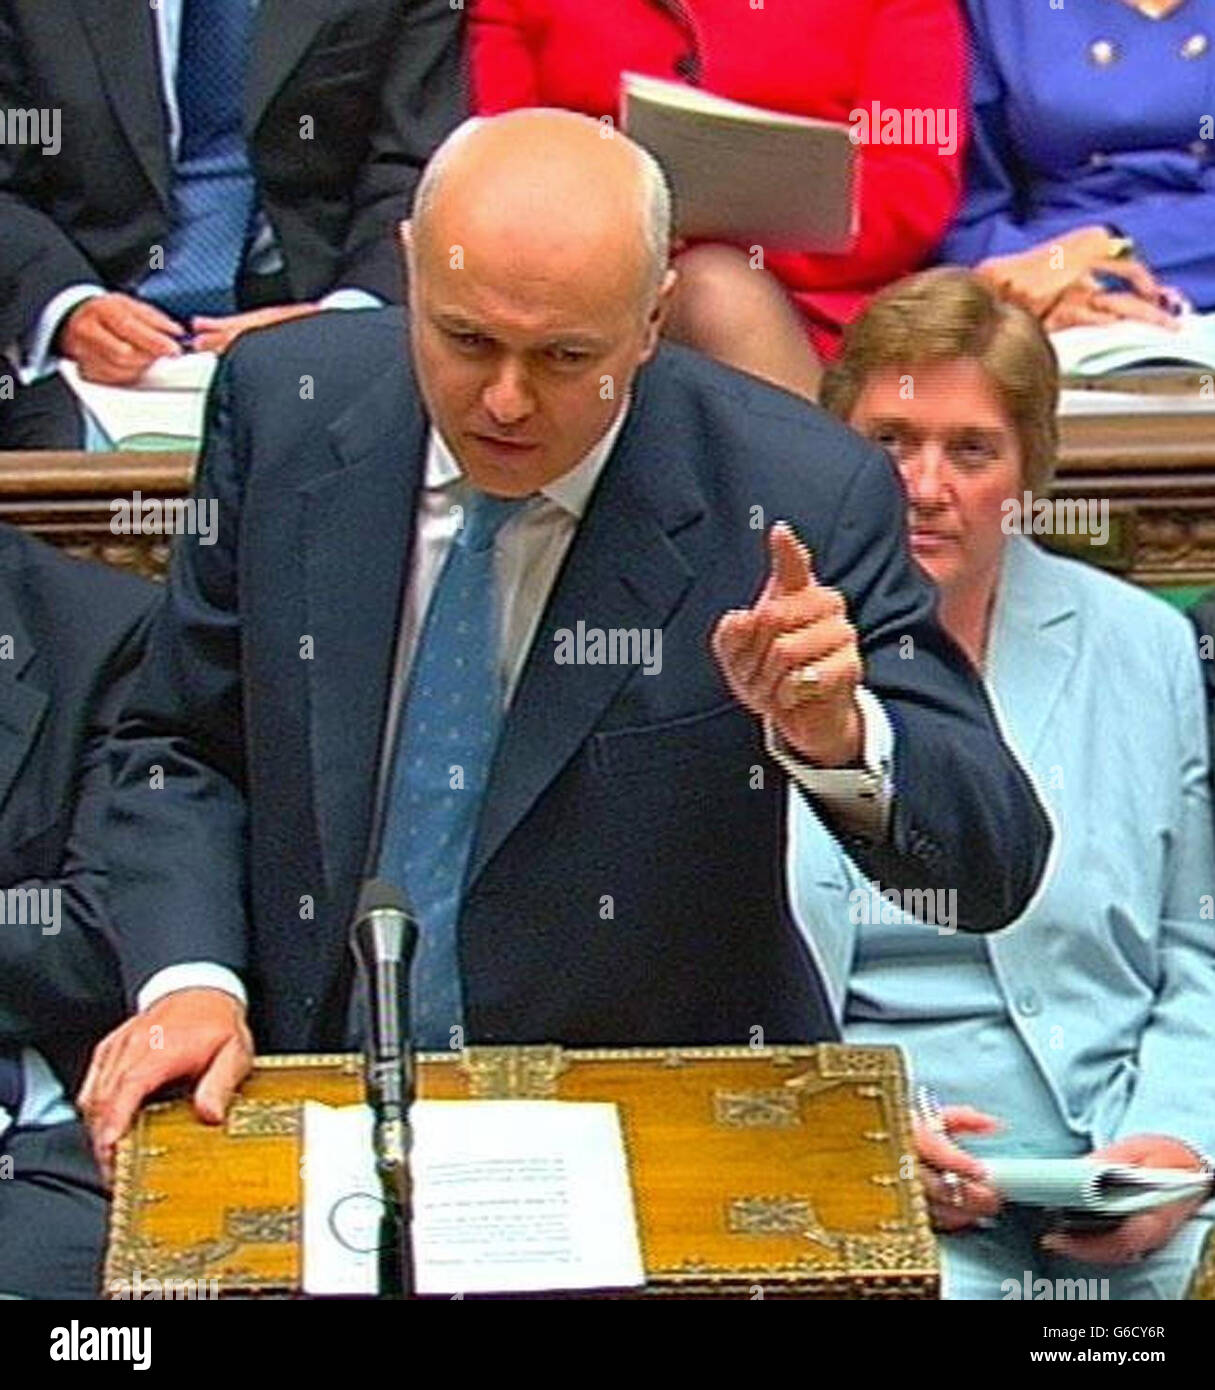 Iain Duncan Smith, the leader of the Conservative party, puts a point to Prime Minister Tony Blair in the House of Commons during his regular weekly session of questions from members of parliament. * Amongst other matters, the PM was expected to be quizzed over allegations that the Government exaggerated the threat of Iraq's weapons of mass destruction. Stock Photo